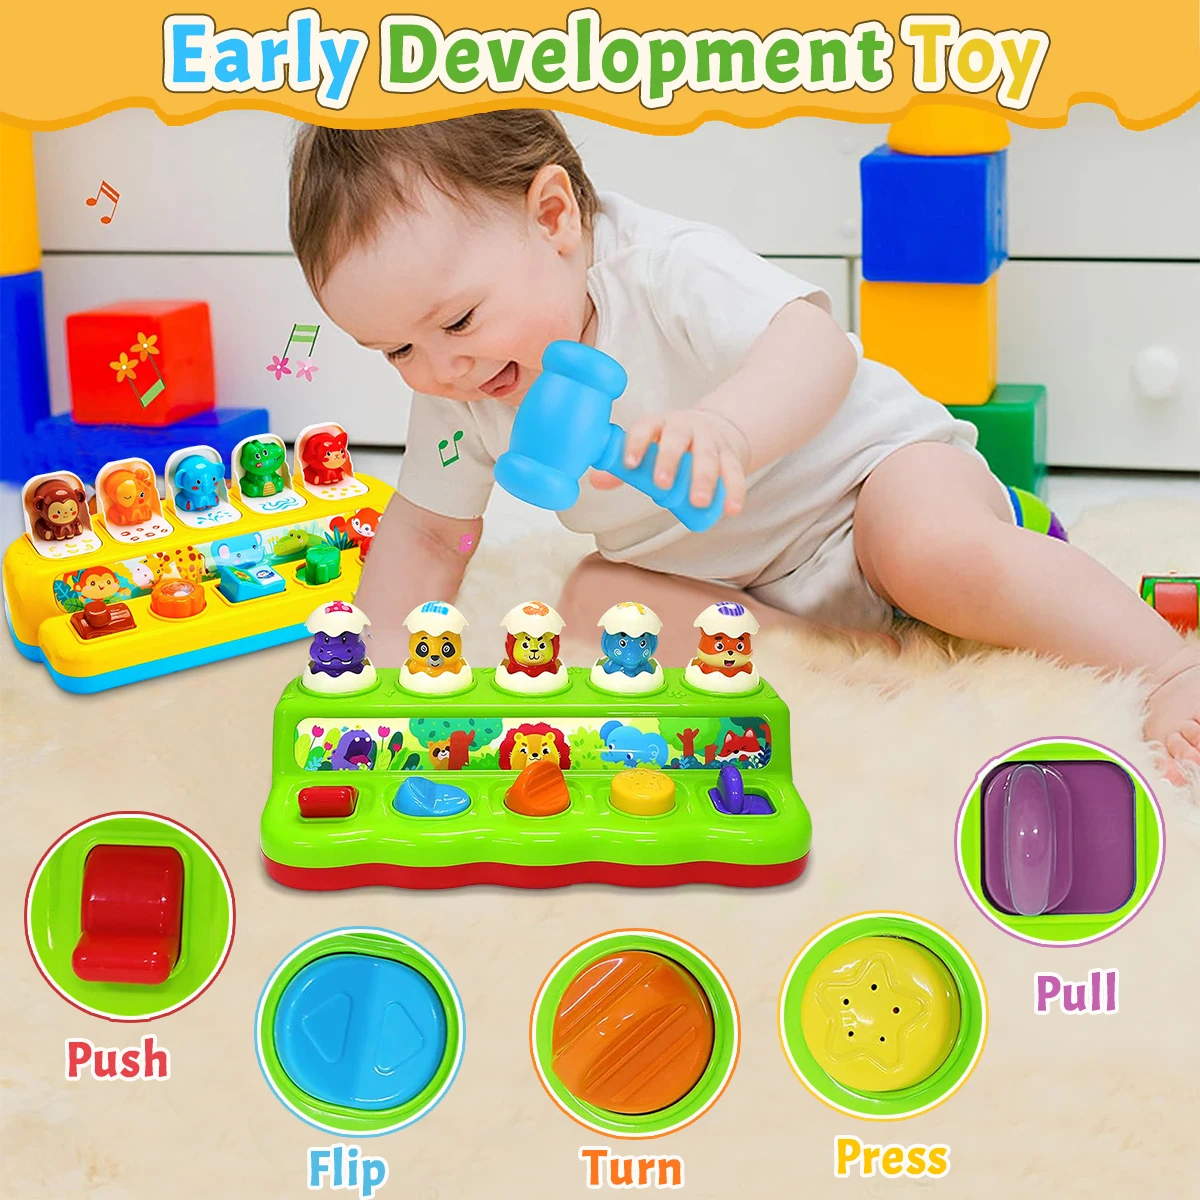 Interactive Pop Up Animals Toy Peekaboo Switch Button Box Treasure Surprise Box Hide Seek Game Baby Early Education Puzzle Game